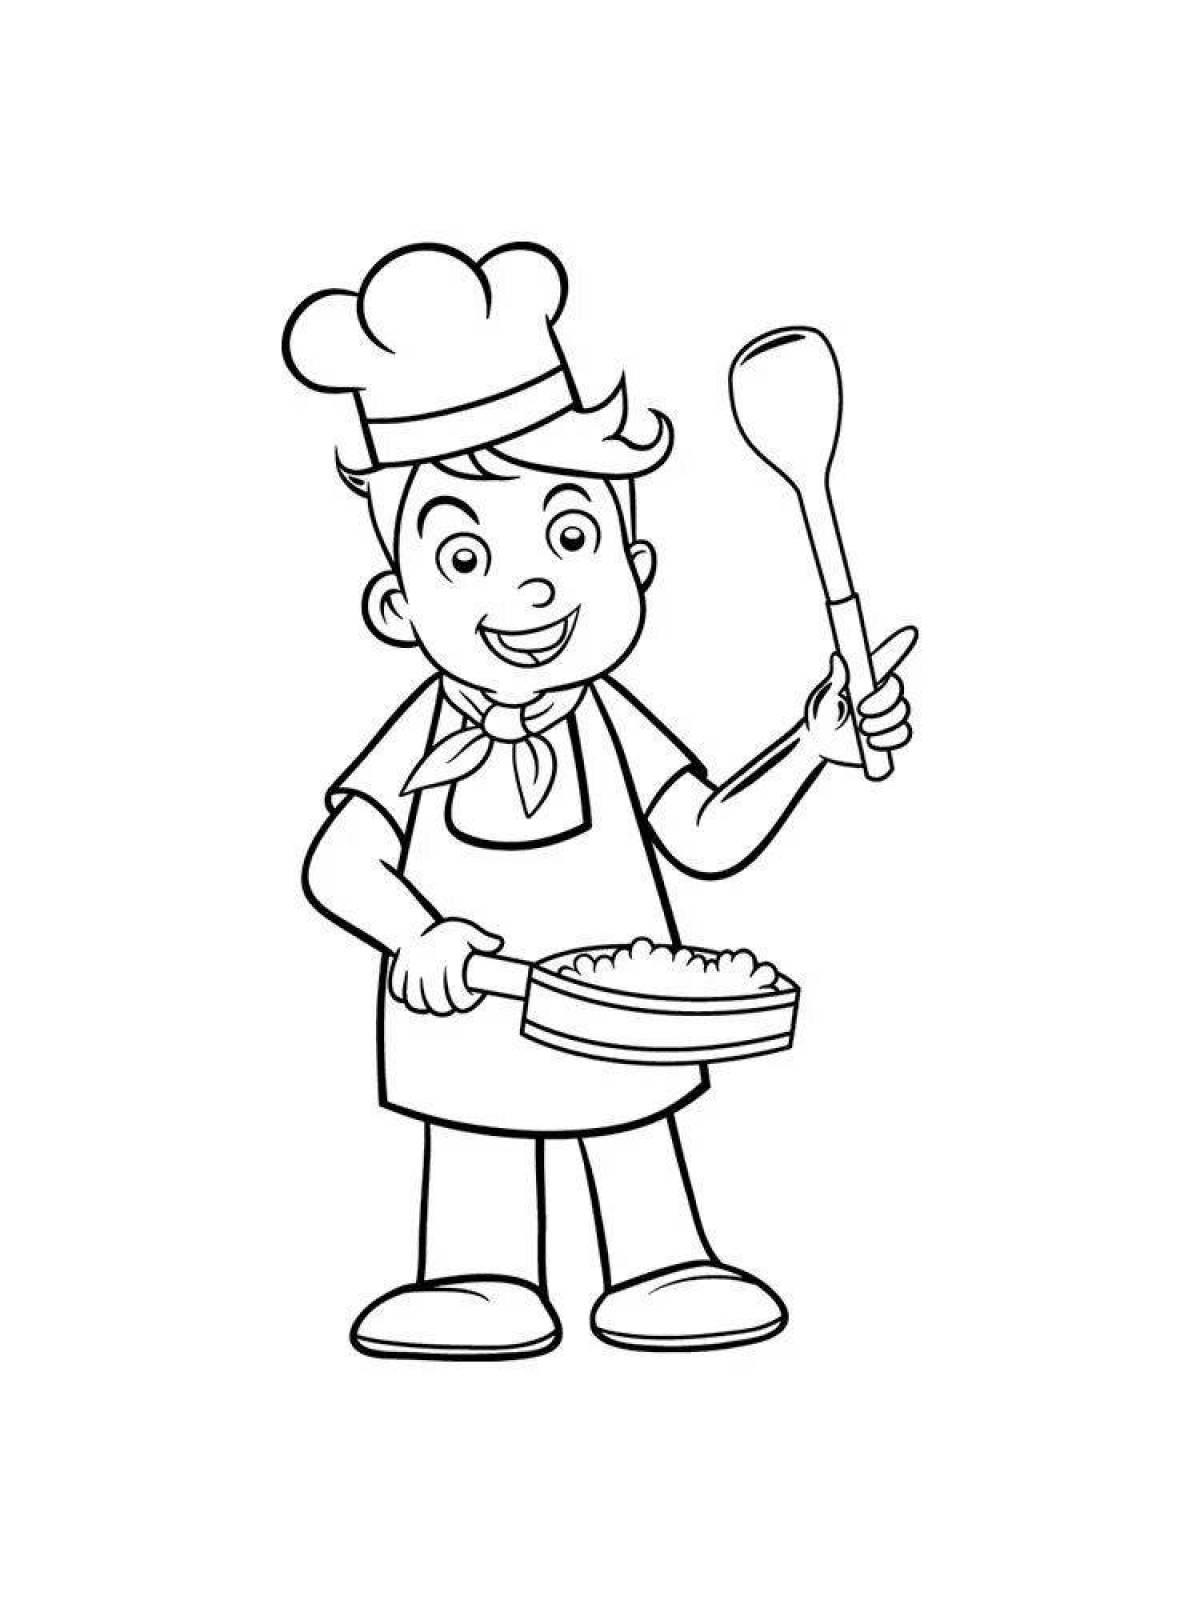 Creative Chef Coloring Page with Color